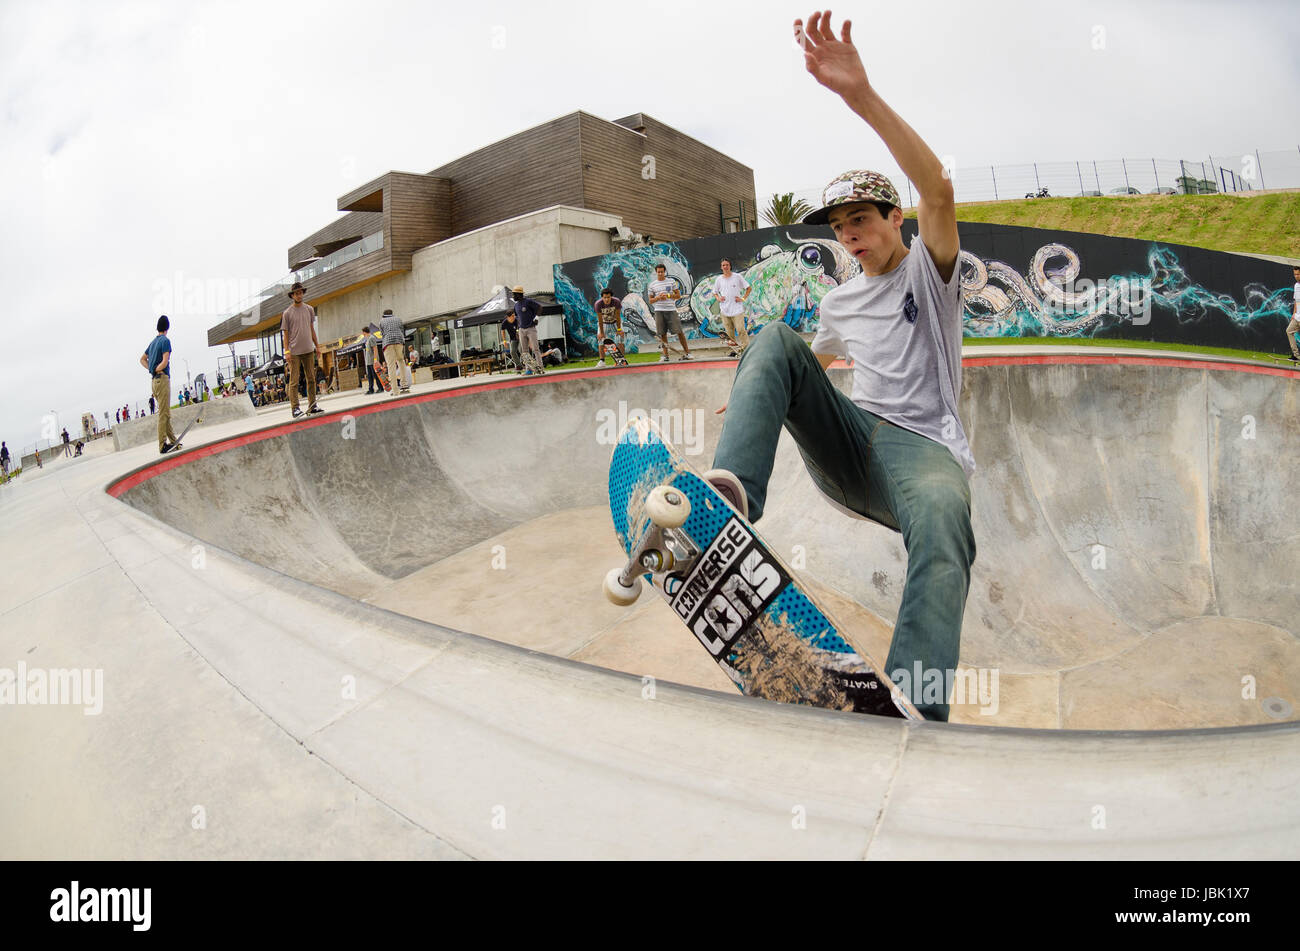 Skateboard Park Portugal High Resolution Stock Photography and Images -  Alamy